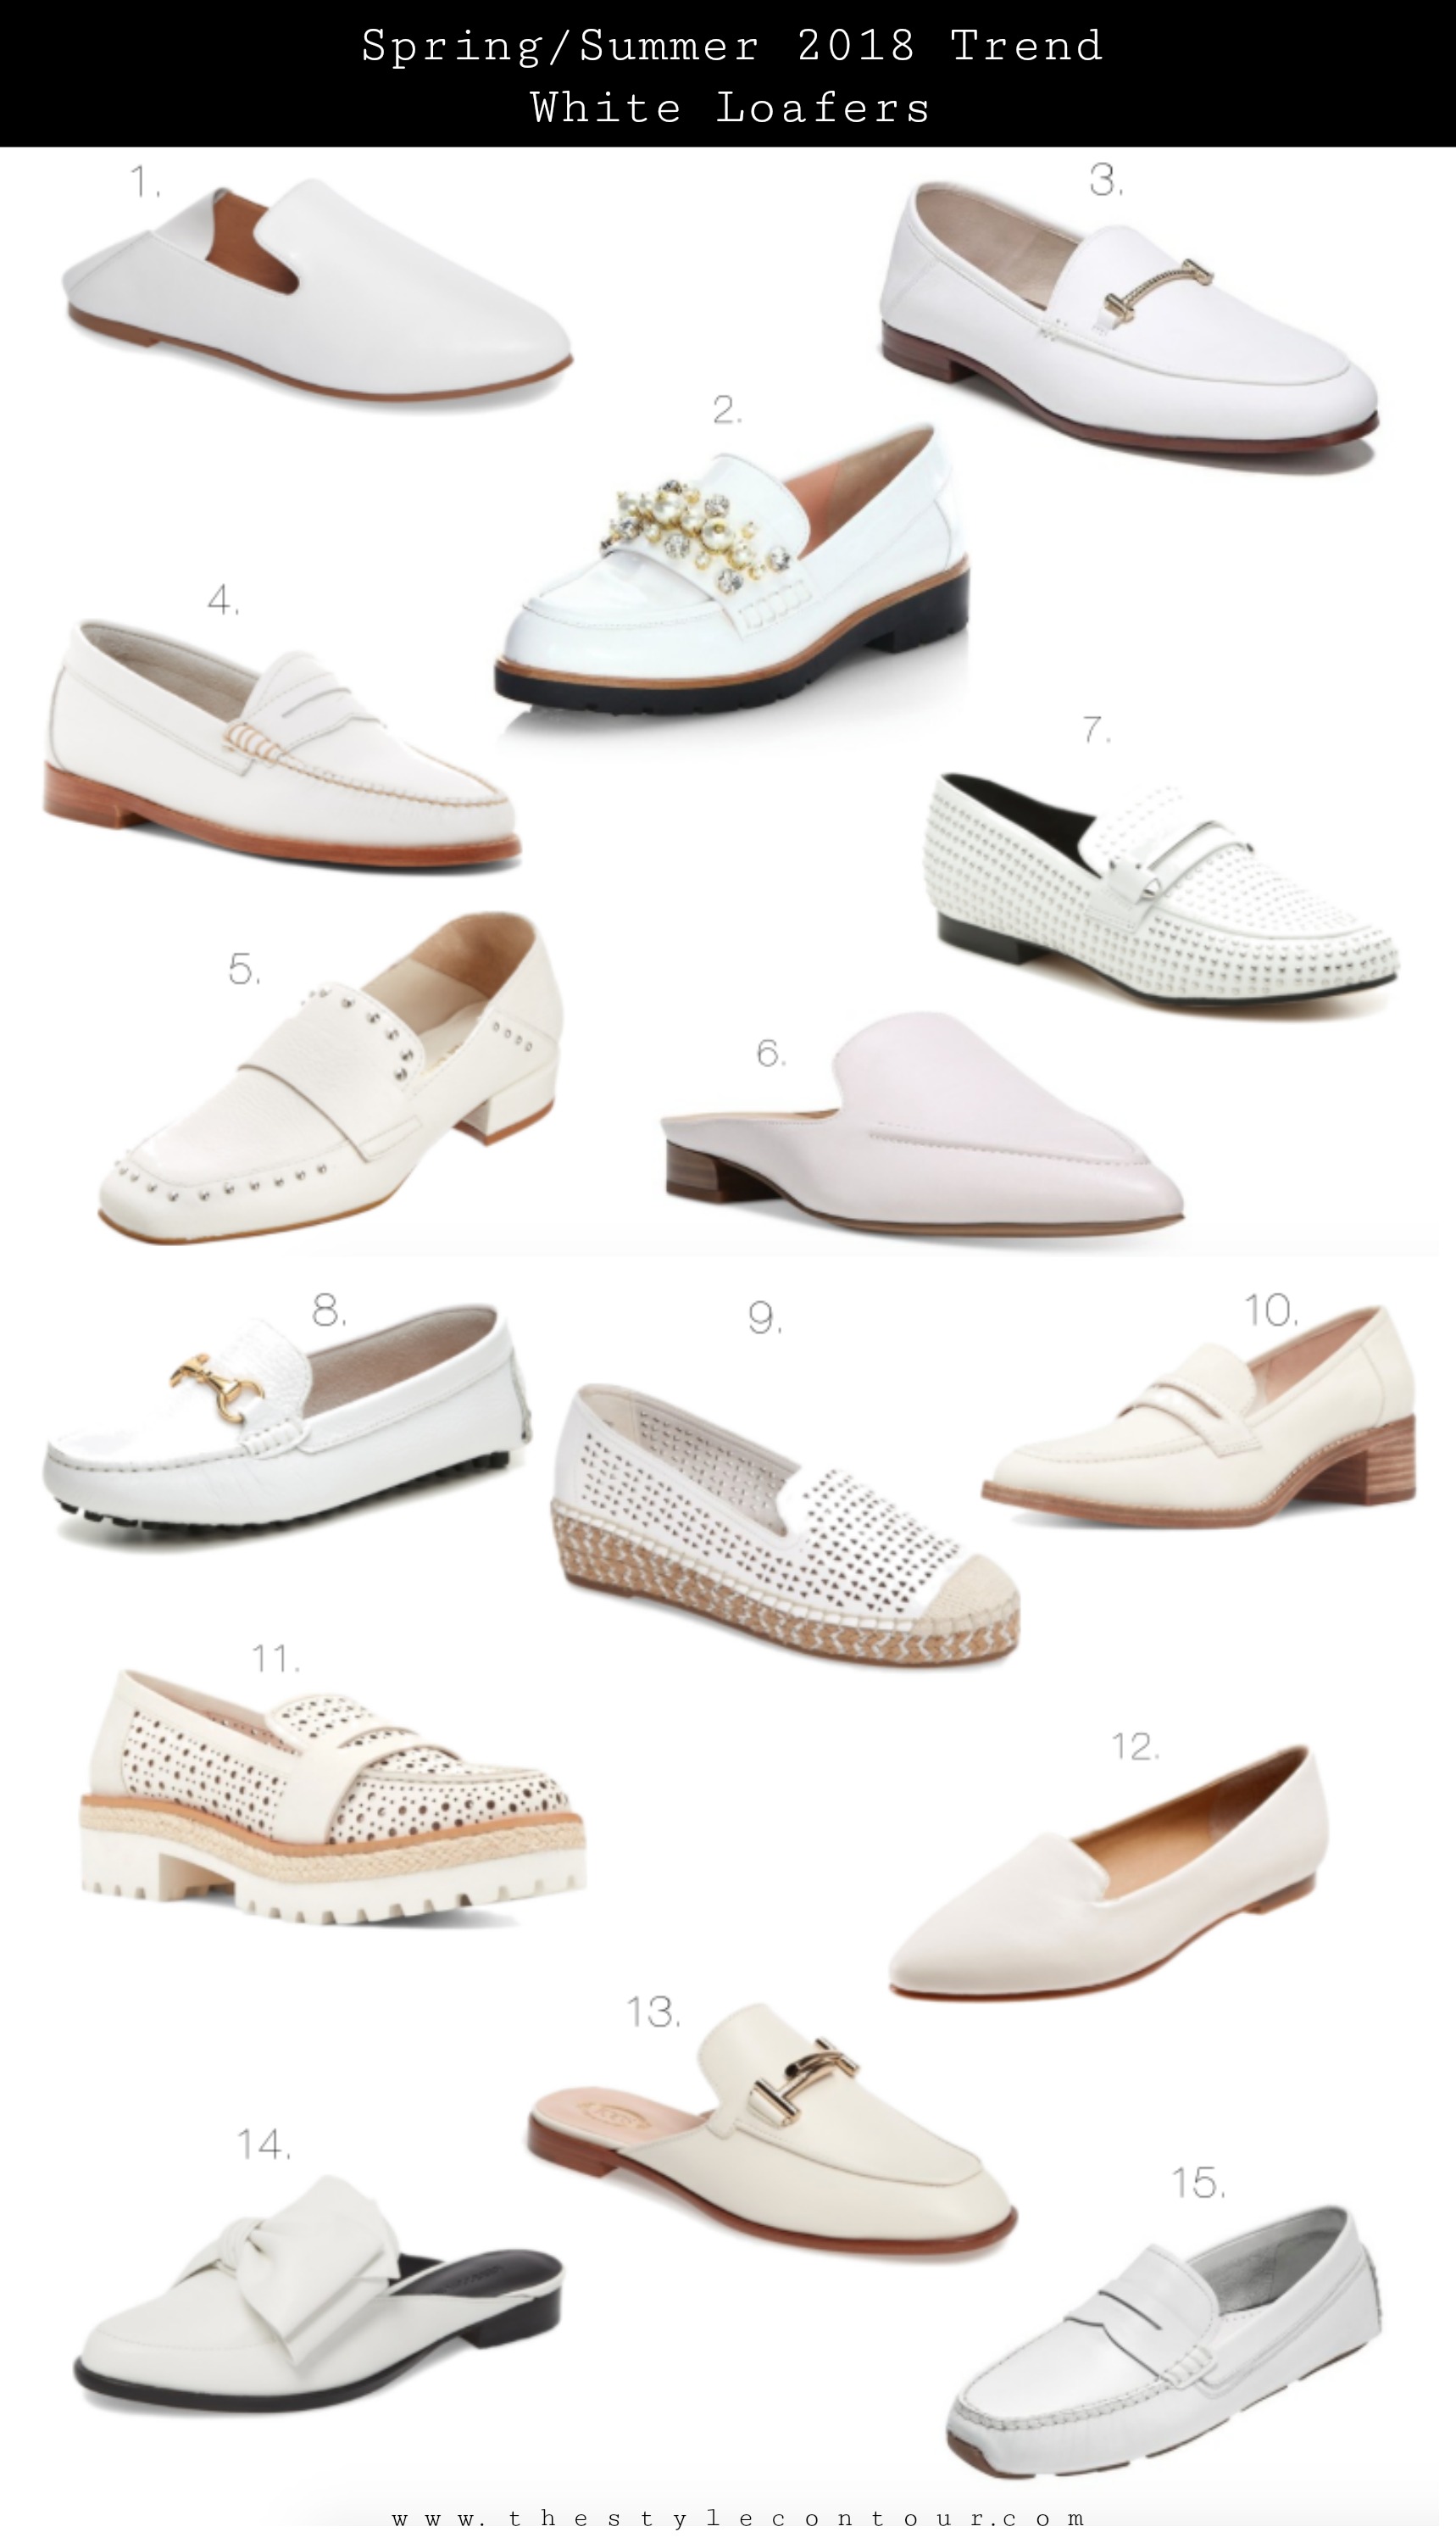 Fashion Forecast: White Loafer Trend 2018 - The Style Contour